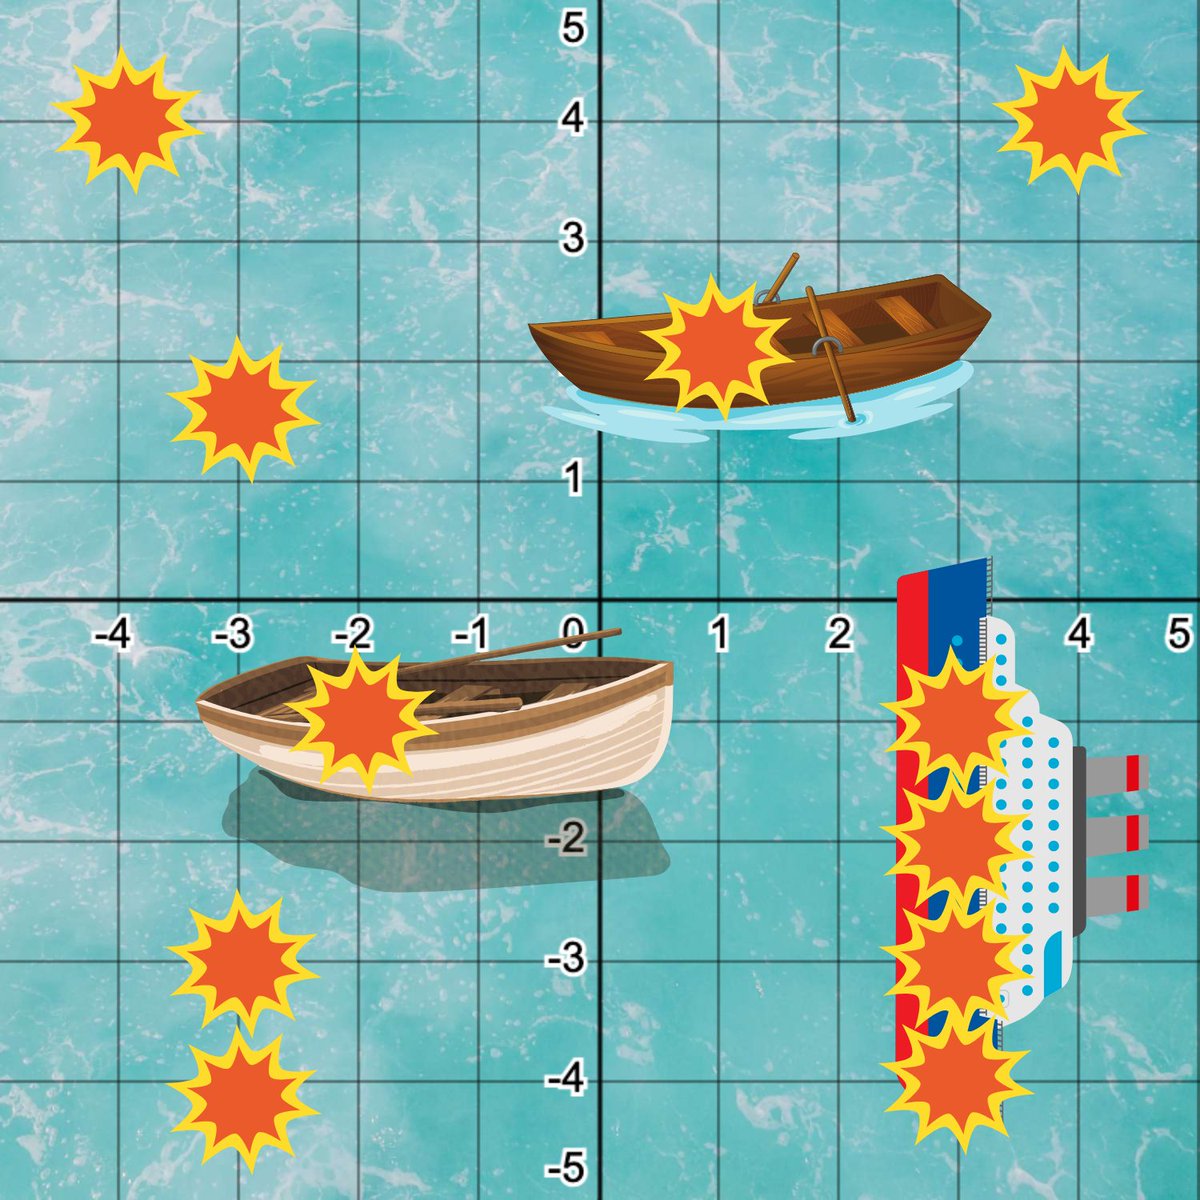 ⛴ I made a coordinate plane Battleship refresher game in @quizizz 

Play here: 
quizizz.com/join?gc=767987…

Here is the game to modify/assign: quizizz.com/admin/quiz/64e… 

Here is the @canva link to modify
canva.com/design/DAFsMnz… 

#EdTech #gamification #ITeachMath #Mathchat